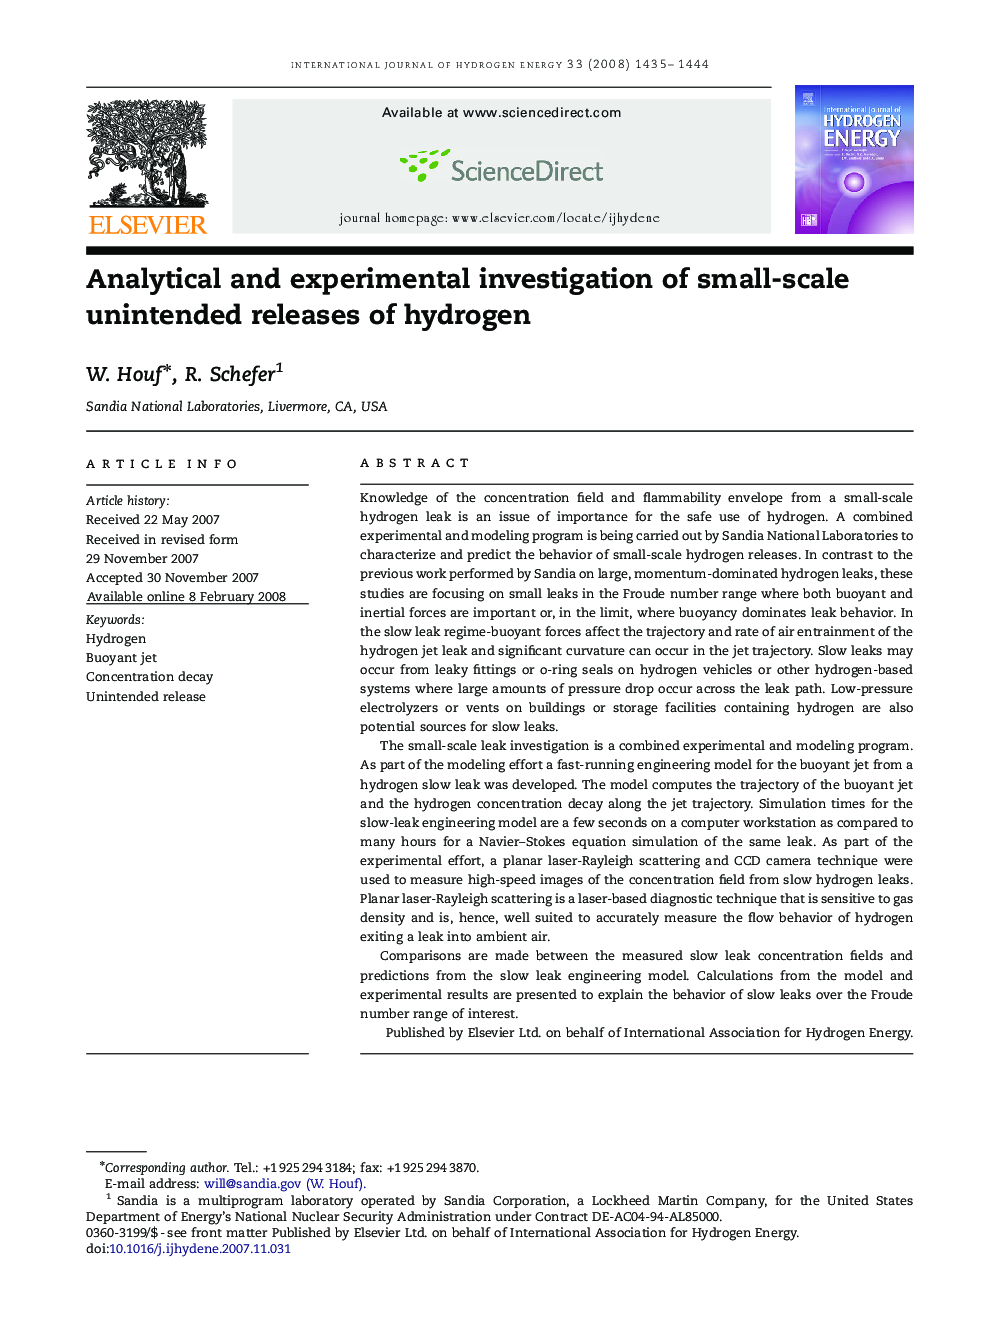 Analytical and experimental investigation of small-scale unintended releases of hydrogen